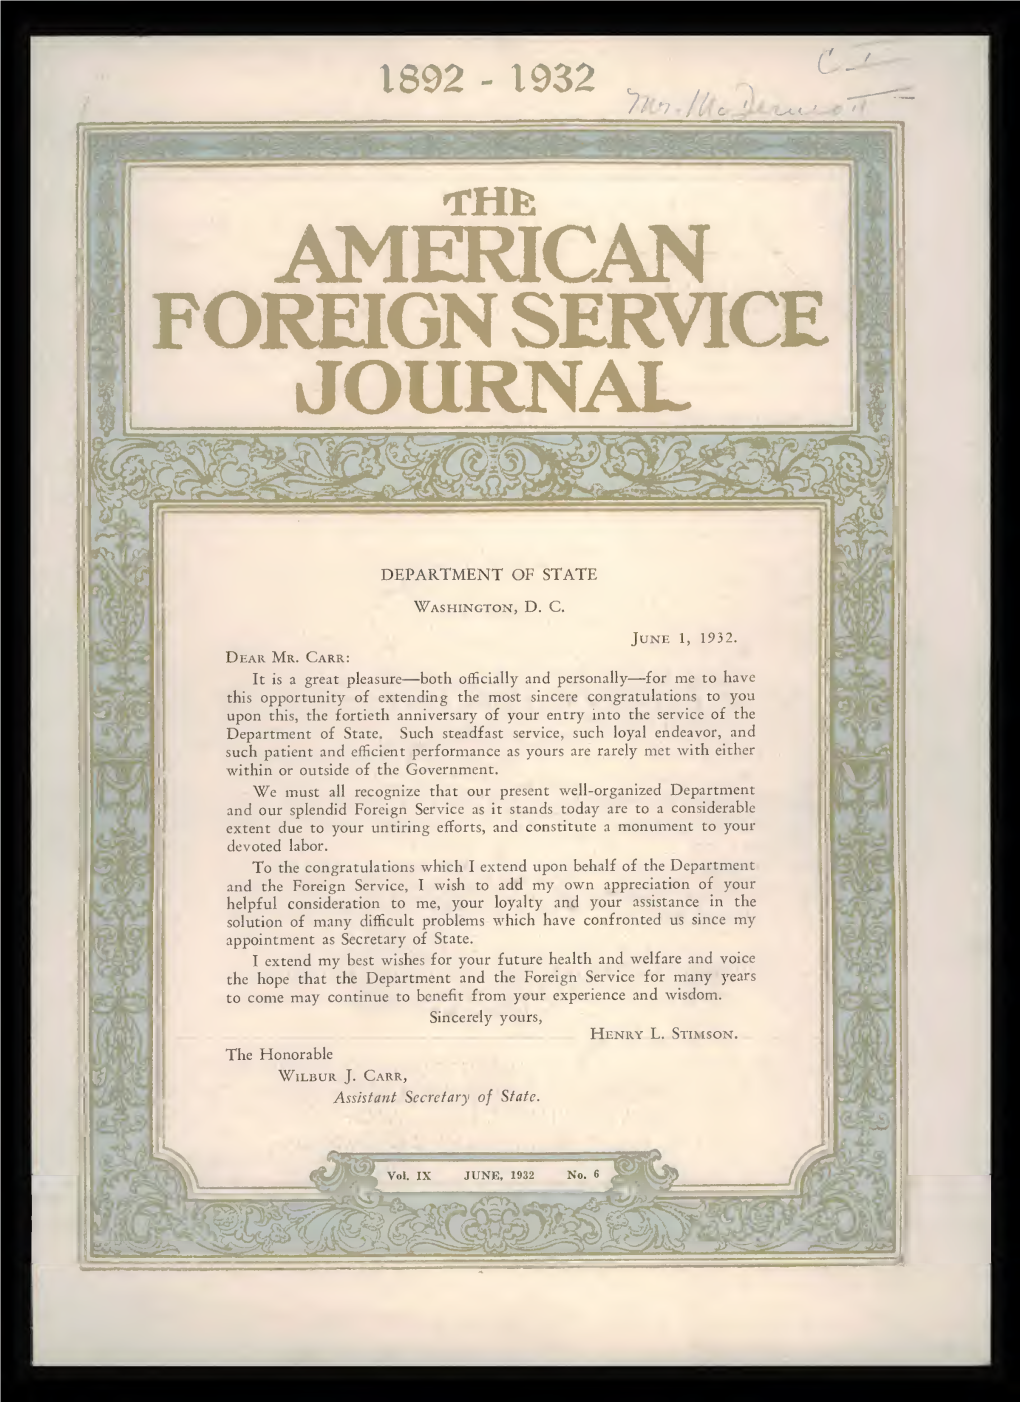 The Foreign Service Journal, June 1932